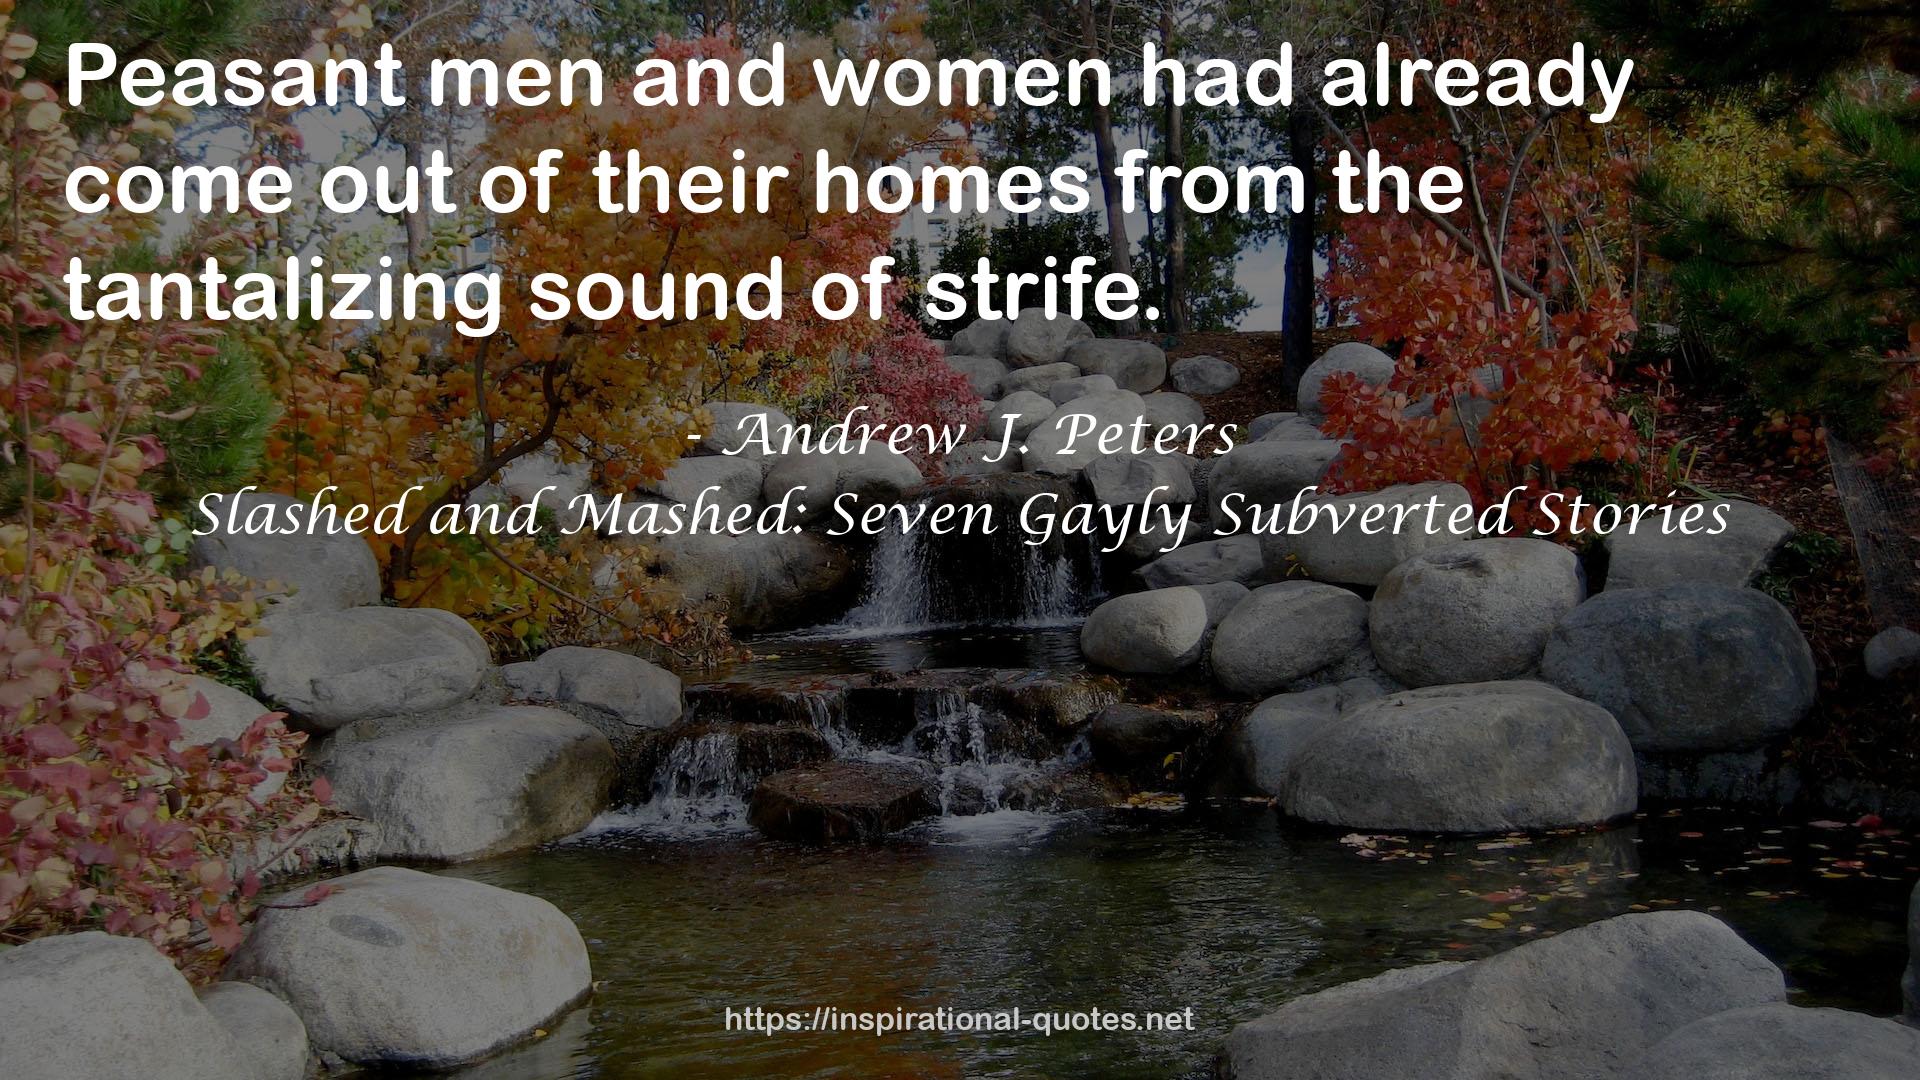 Slashed and Mashed: Seven Gayly Subverted Stories QUOTES